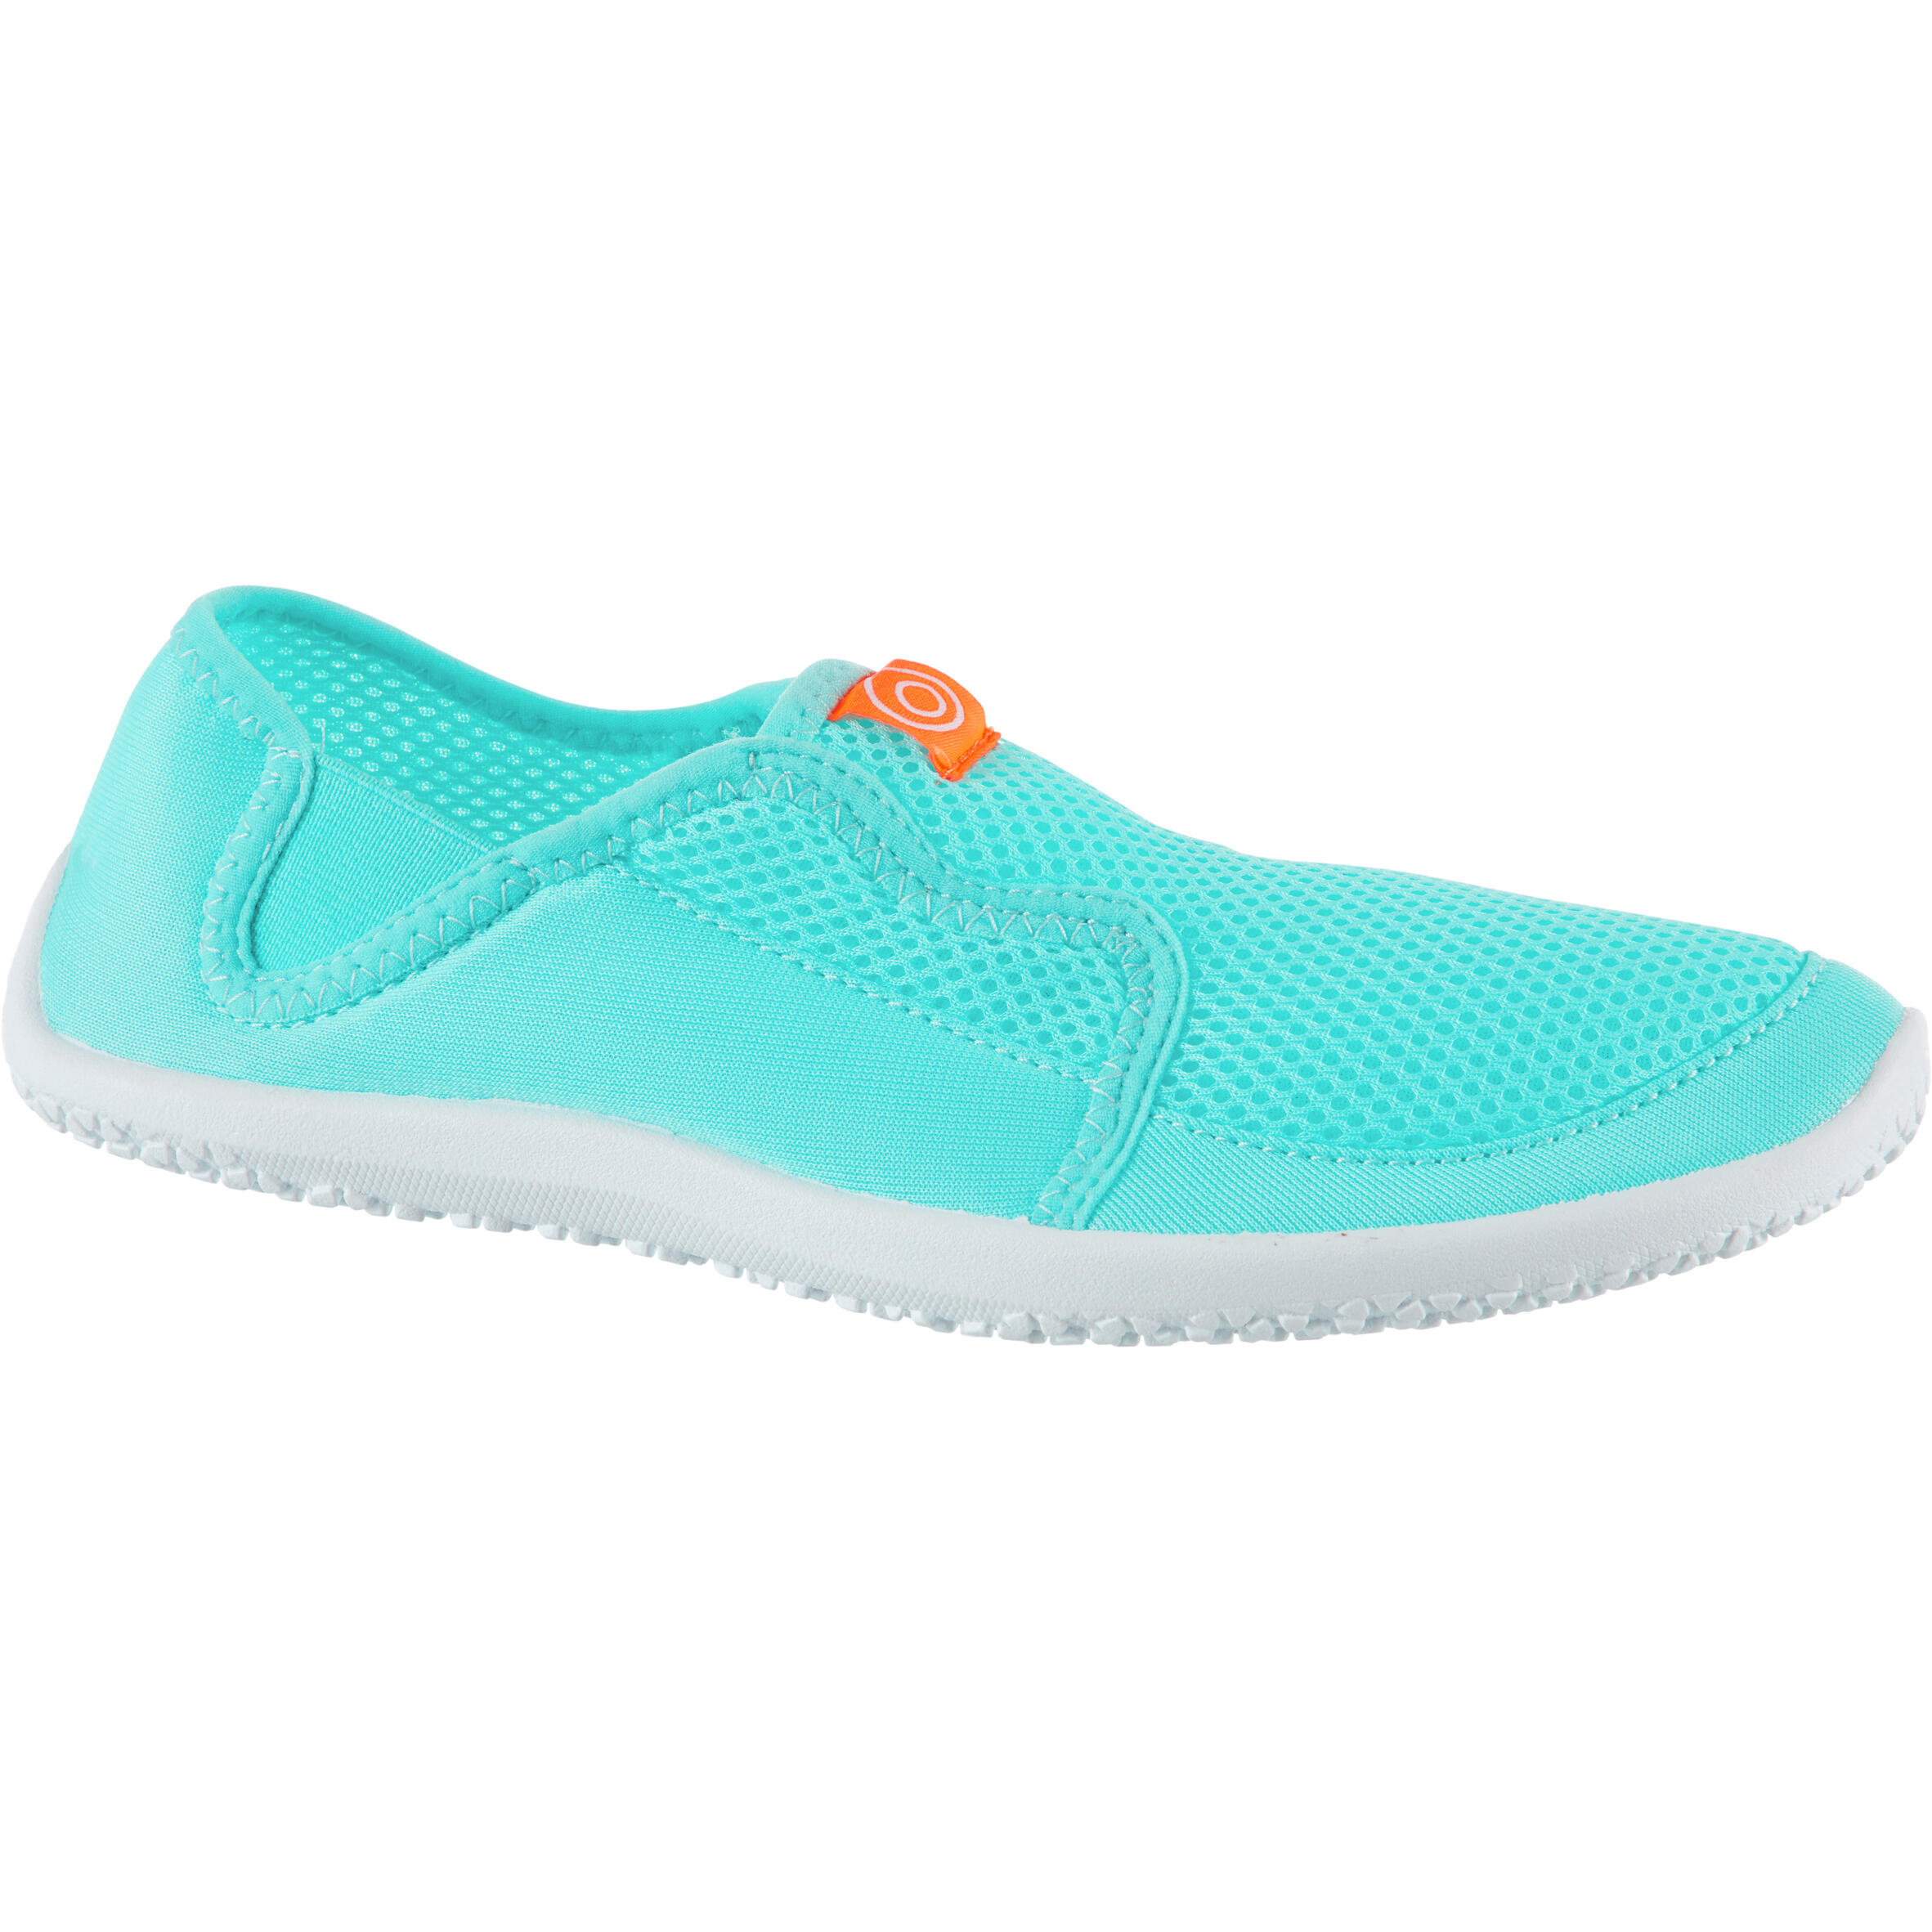 water shoes decathlon